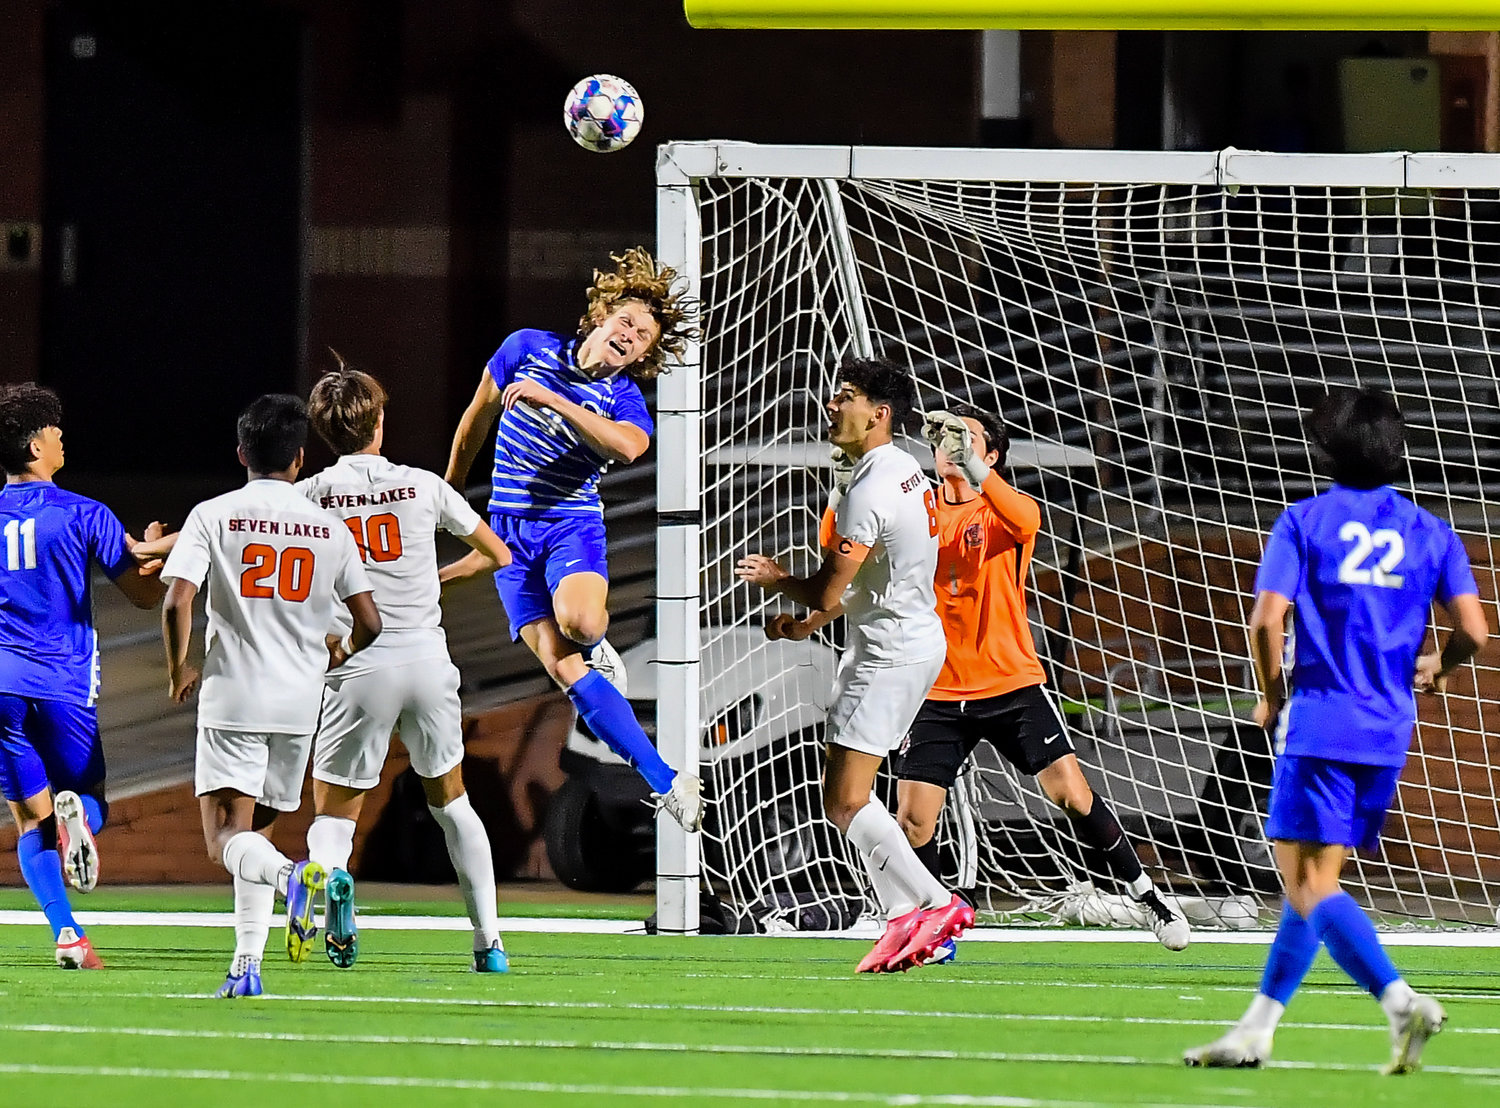 April 1, 2022: Katy Taylors Luke Skelton #3 heads the ball as he tries to score for the Mustangs during Regional Quarterfinal soccer playoff, Seven Lakes vs Katy Taylor at Rhode Stadium. (Photo by Mark Goodman / Katy Times)